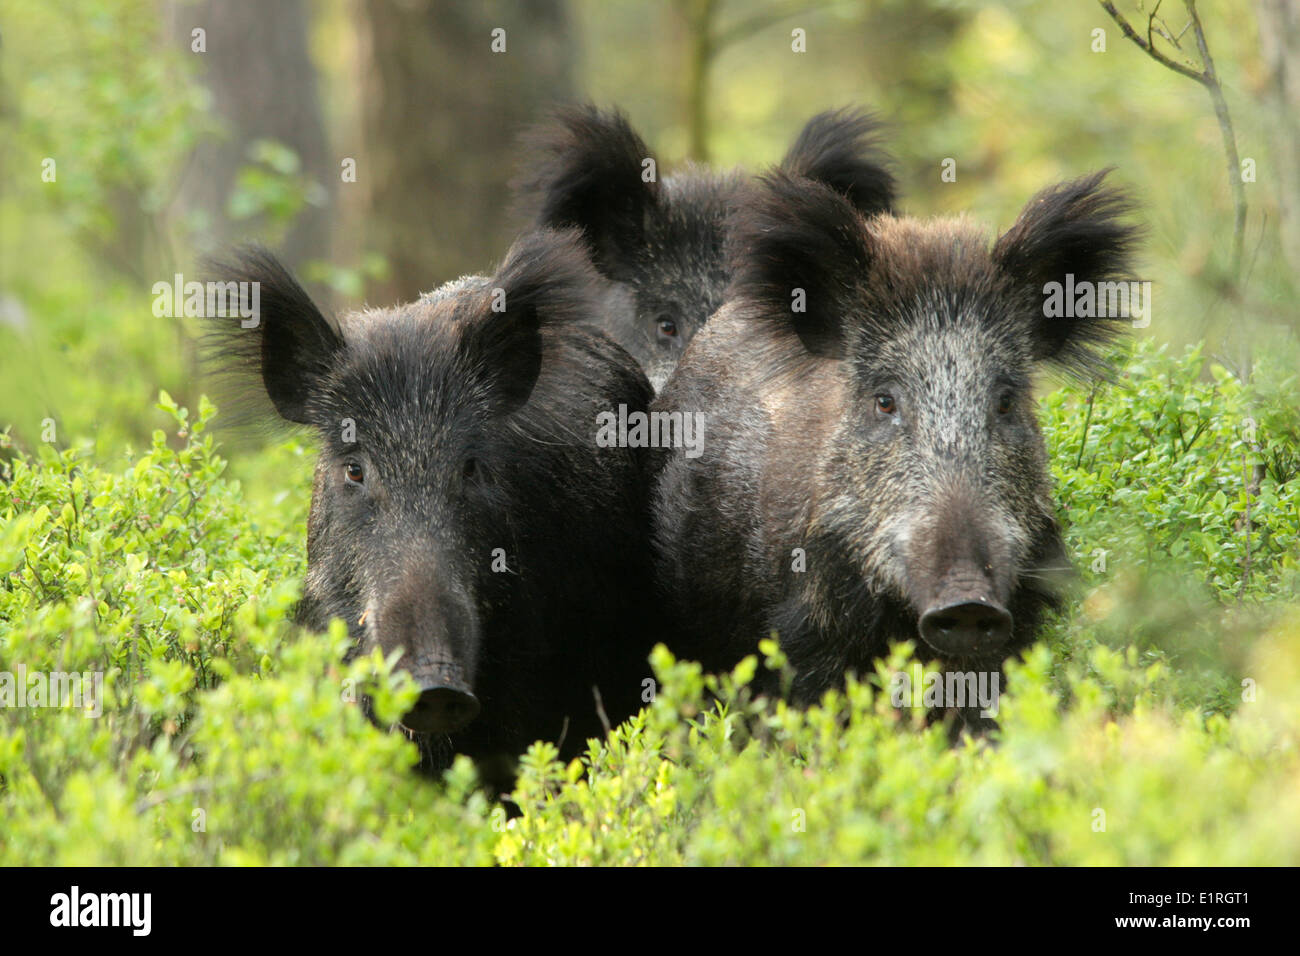 Three wild boars between billberries in a forest, in a natural surrounding Stock Photo